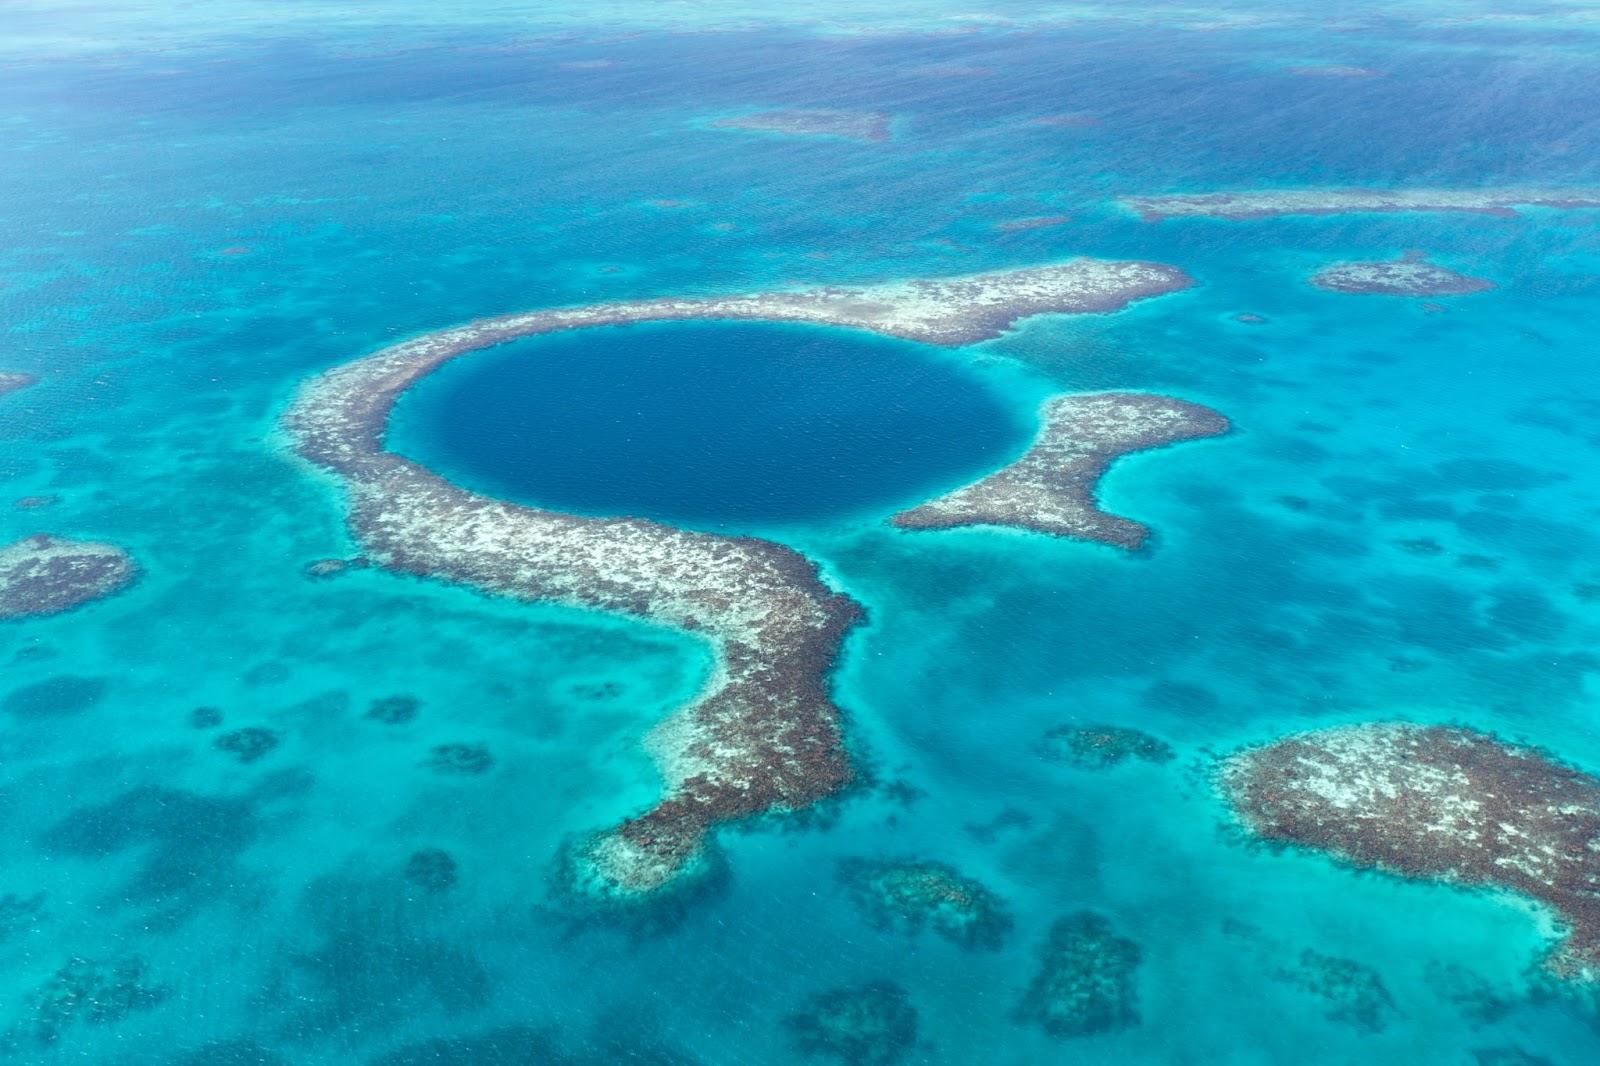 An aerial view of the coral reef and deep cave that make up the famous diving spot of the Blue Hole in the Caribbean Ocean off the coast of Belize.